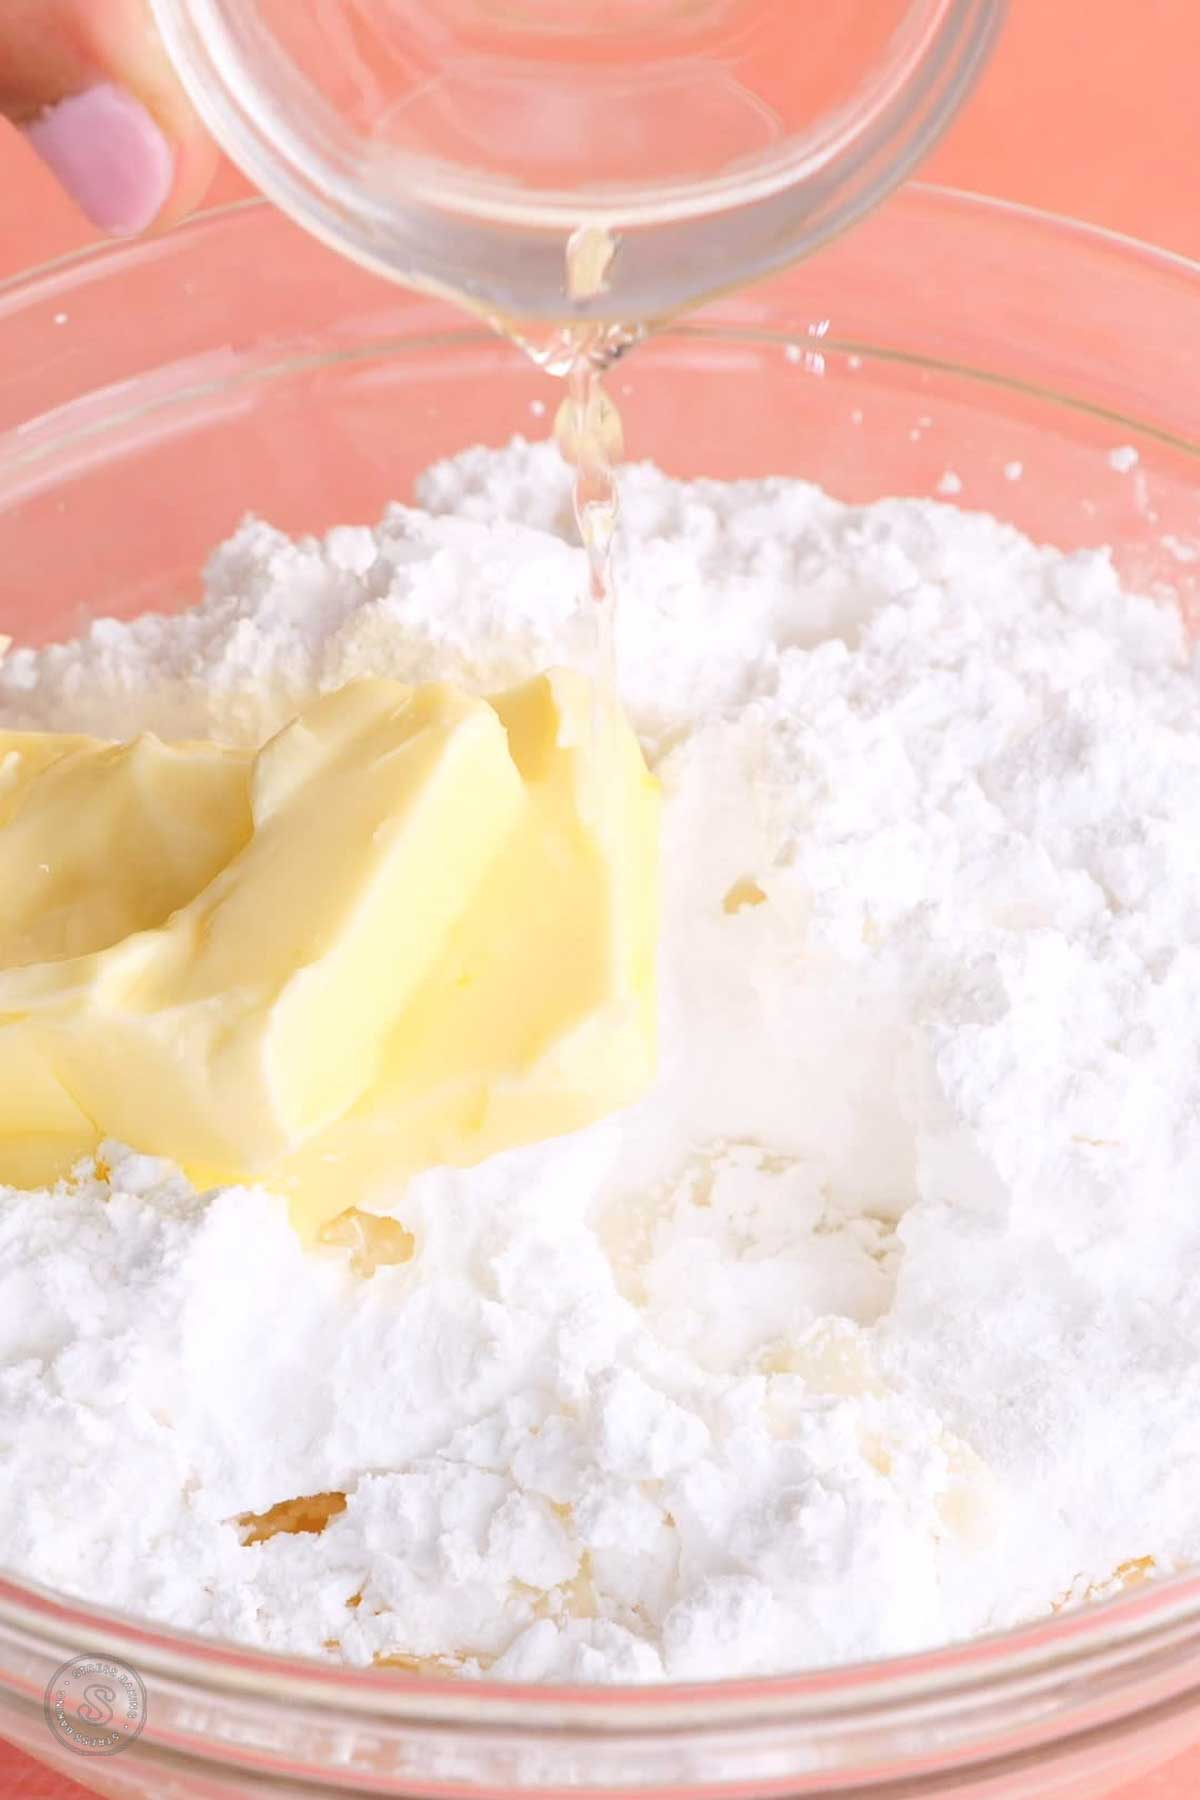 Lemon juice being poured into a bowl of butter and powdered sugar